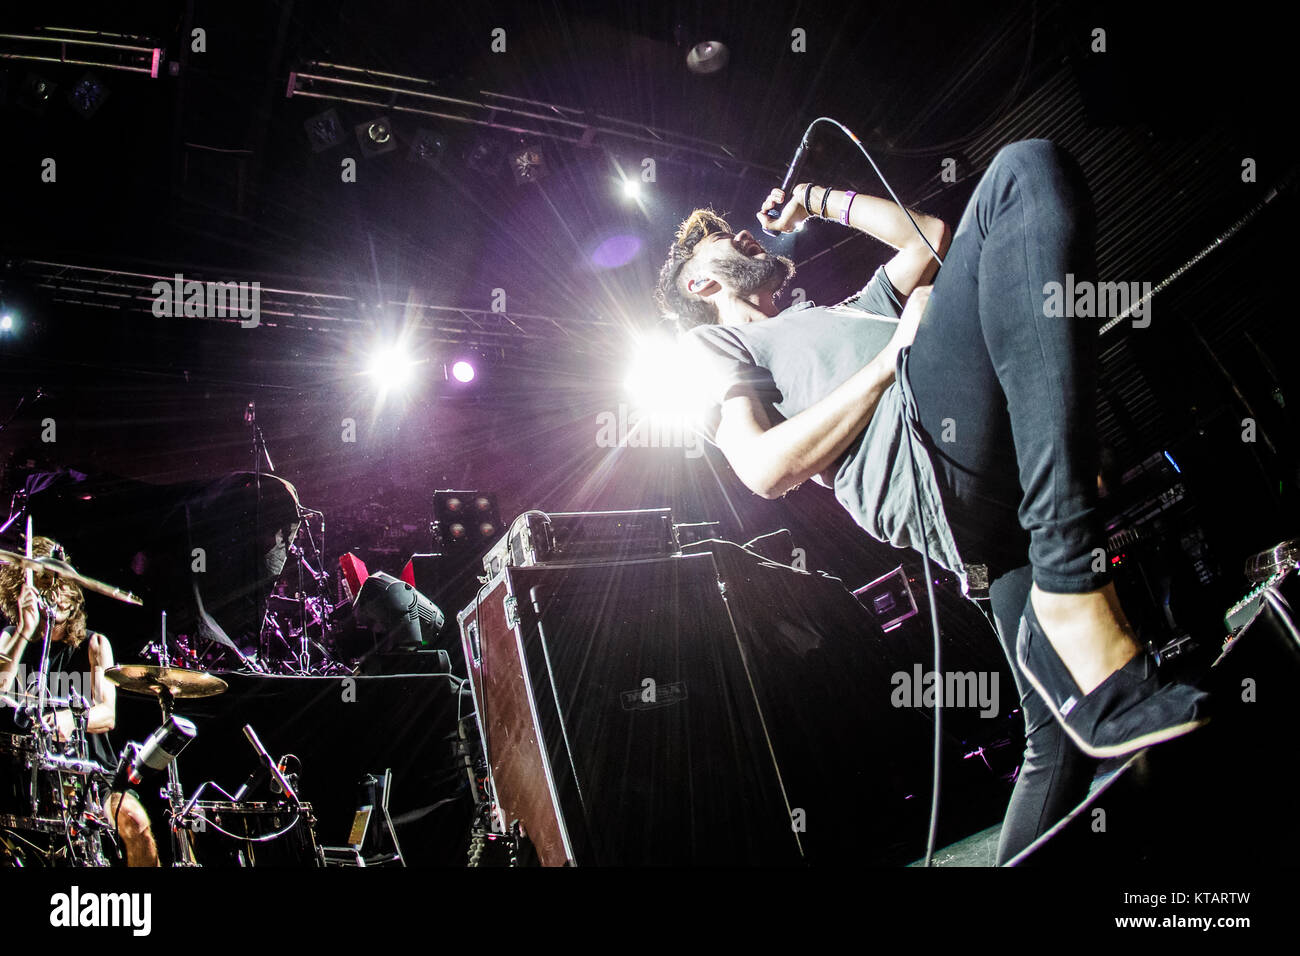 The Australian metalcore band Northlane performs a live concert at ...